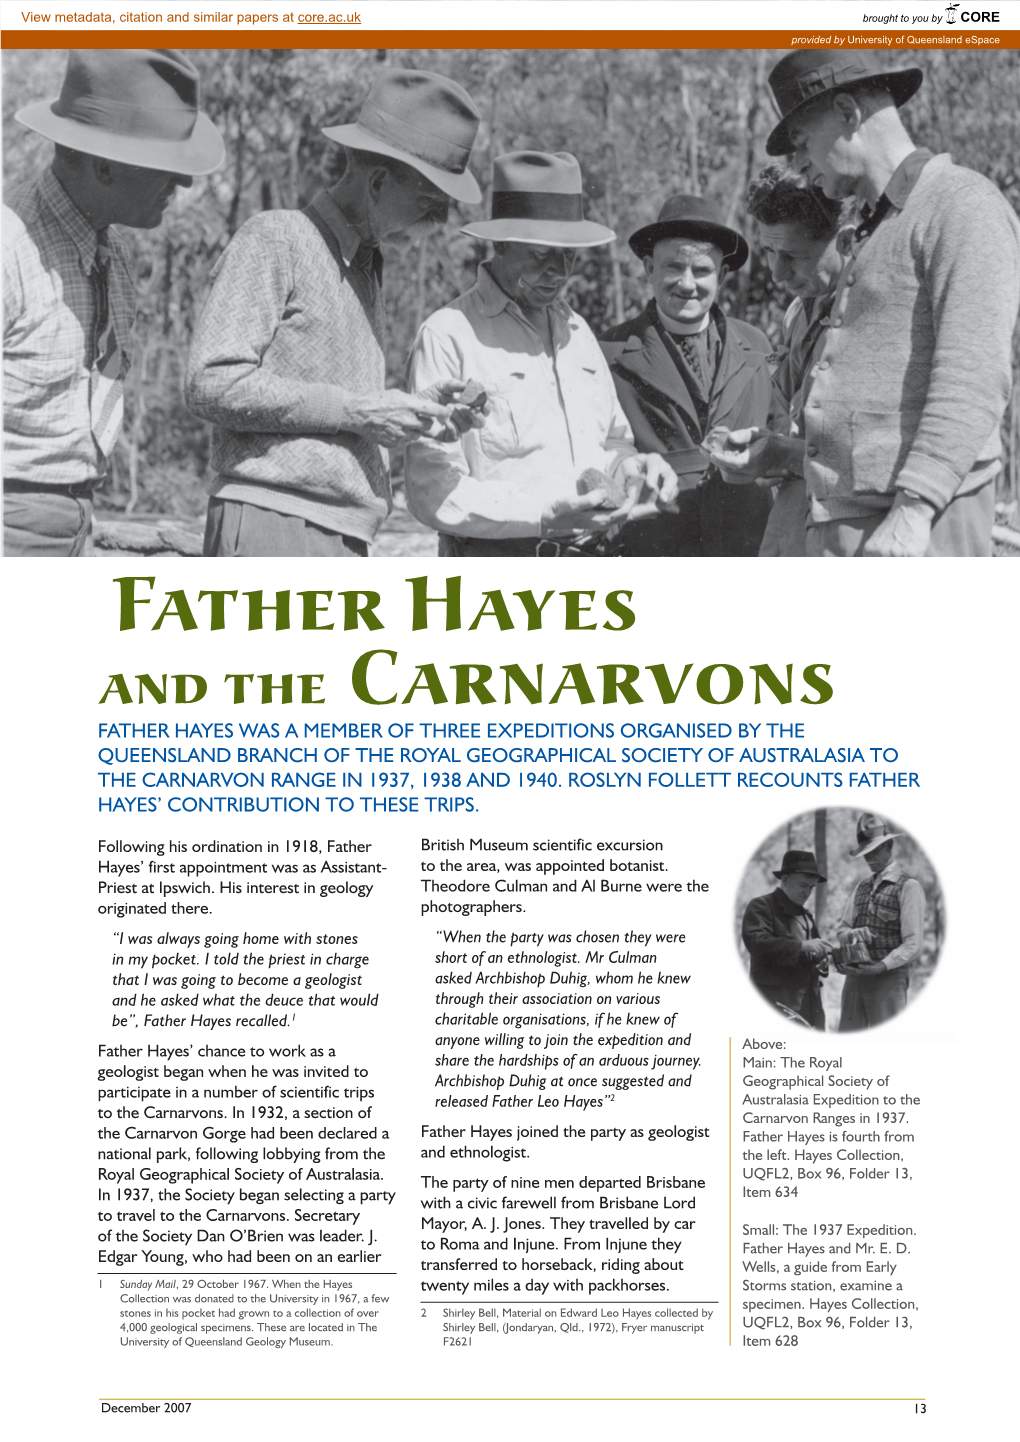 Father Hayes and the Carnarvons